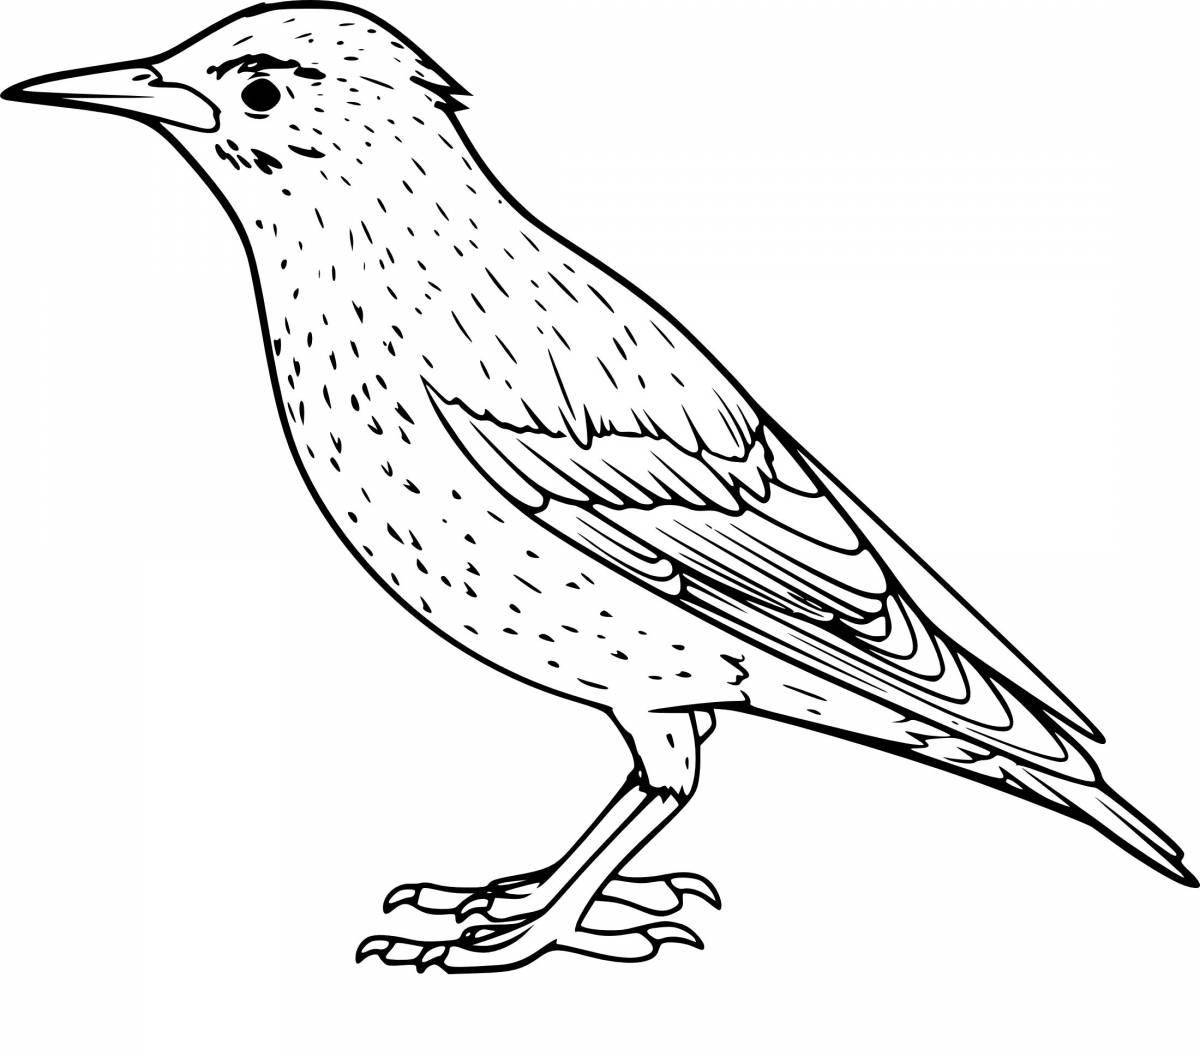 Shiny starling coloring book for kids